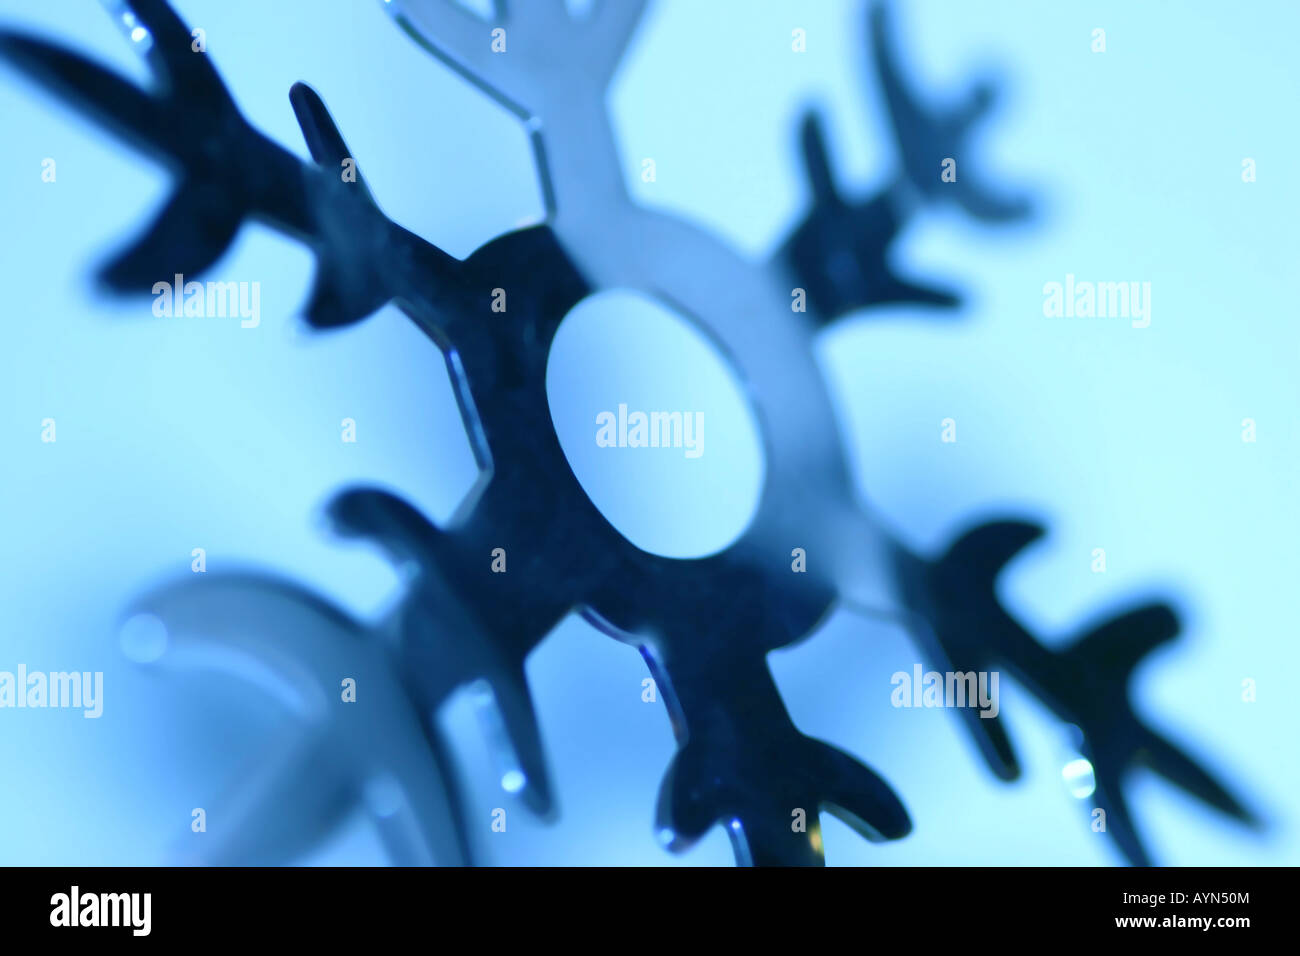 Abstract snowflake with blue tint Stock Photo